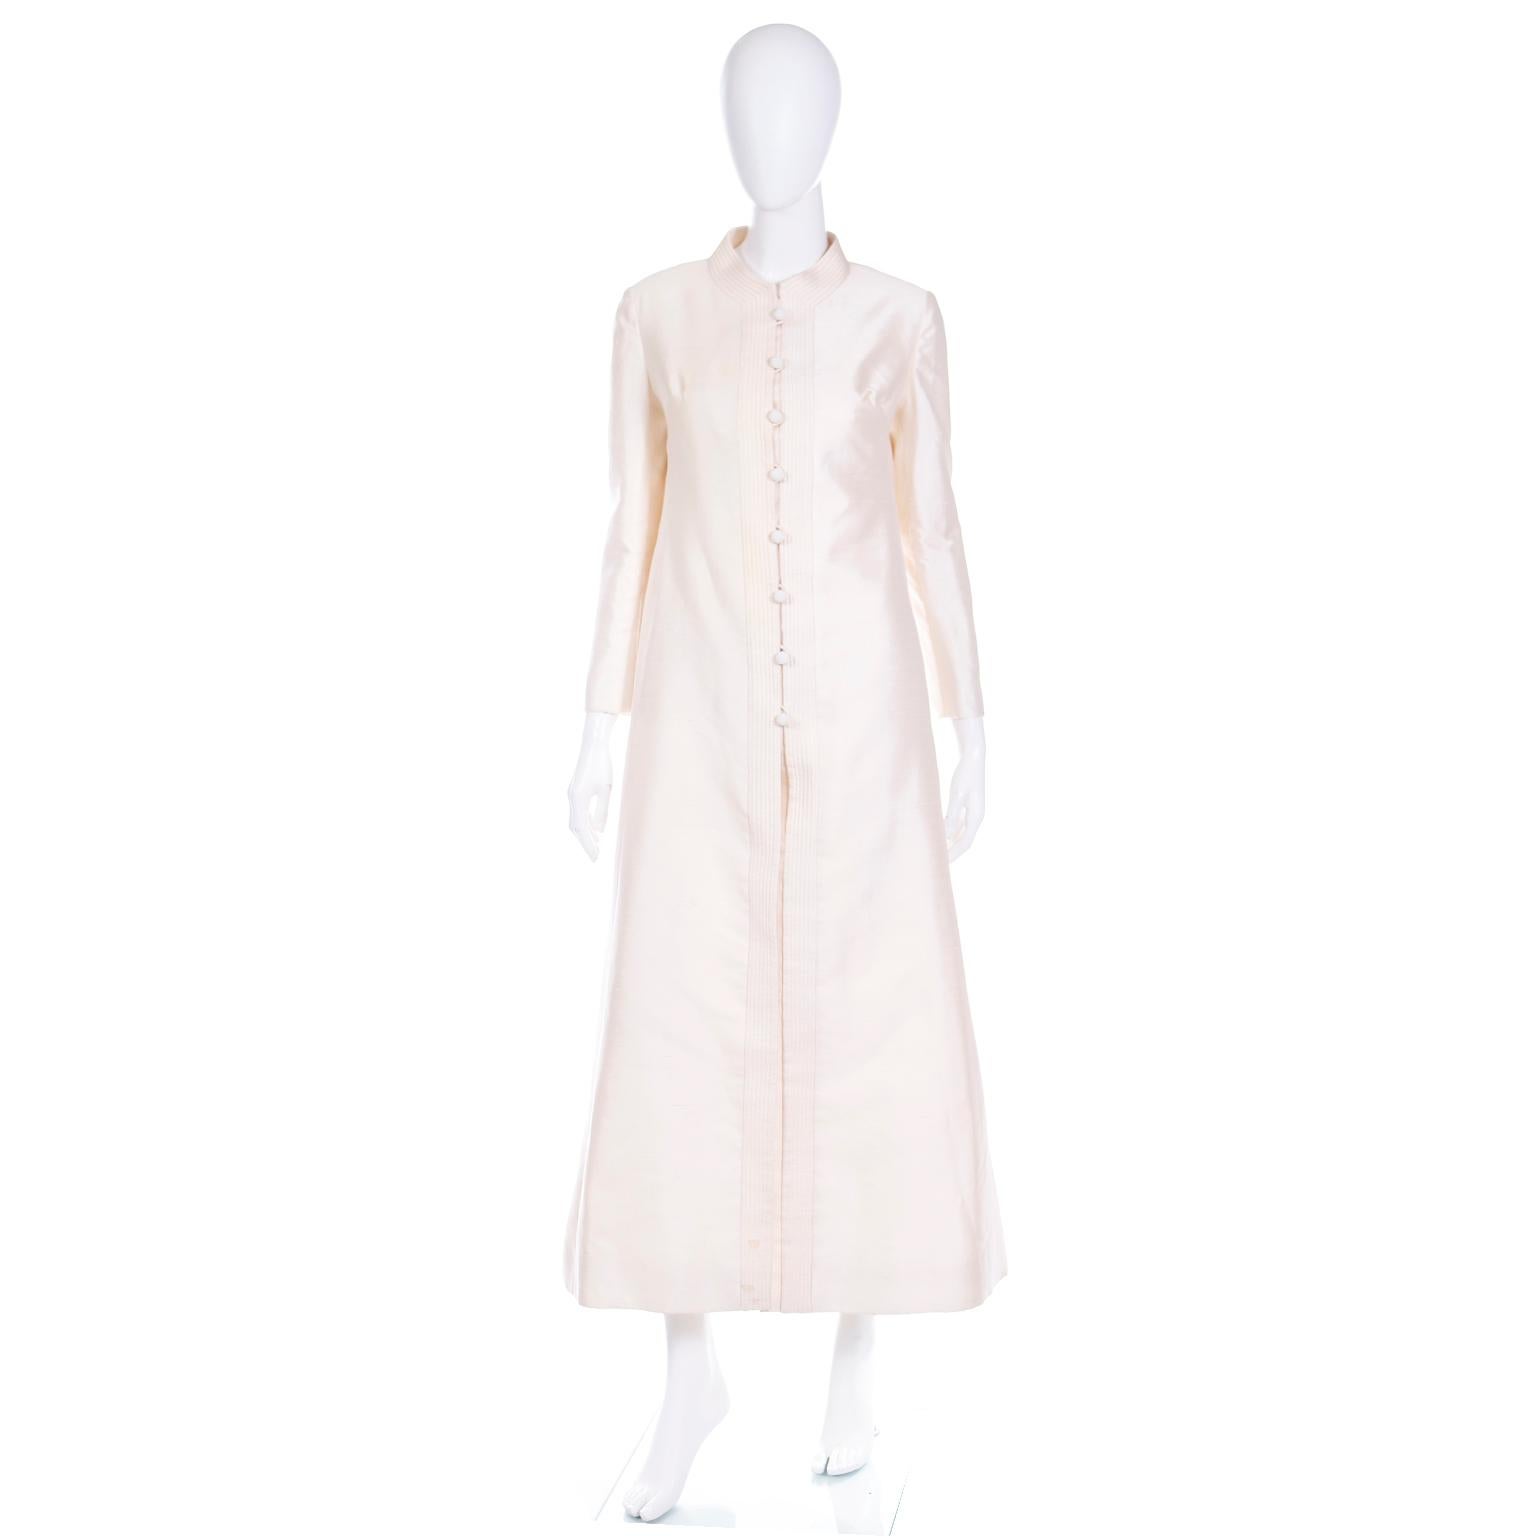 This is a long vintage Dynasty late 1960's or early 1970's creamy ivory silk evening coat. We love coats like these because they can be worn so effortlessly with things already found in a modern wardrobe. This would also make a beautiful coat for a